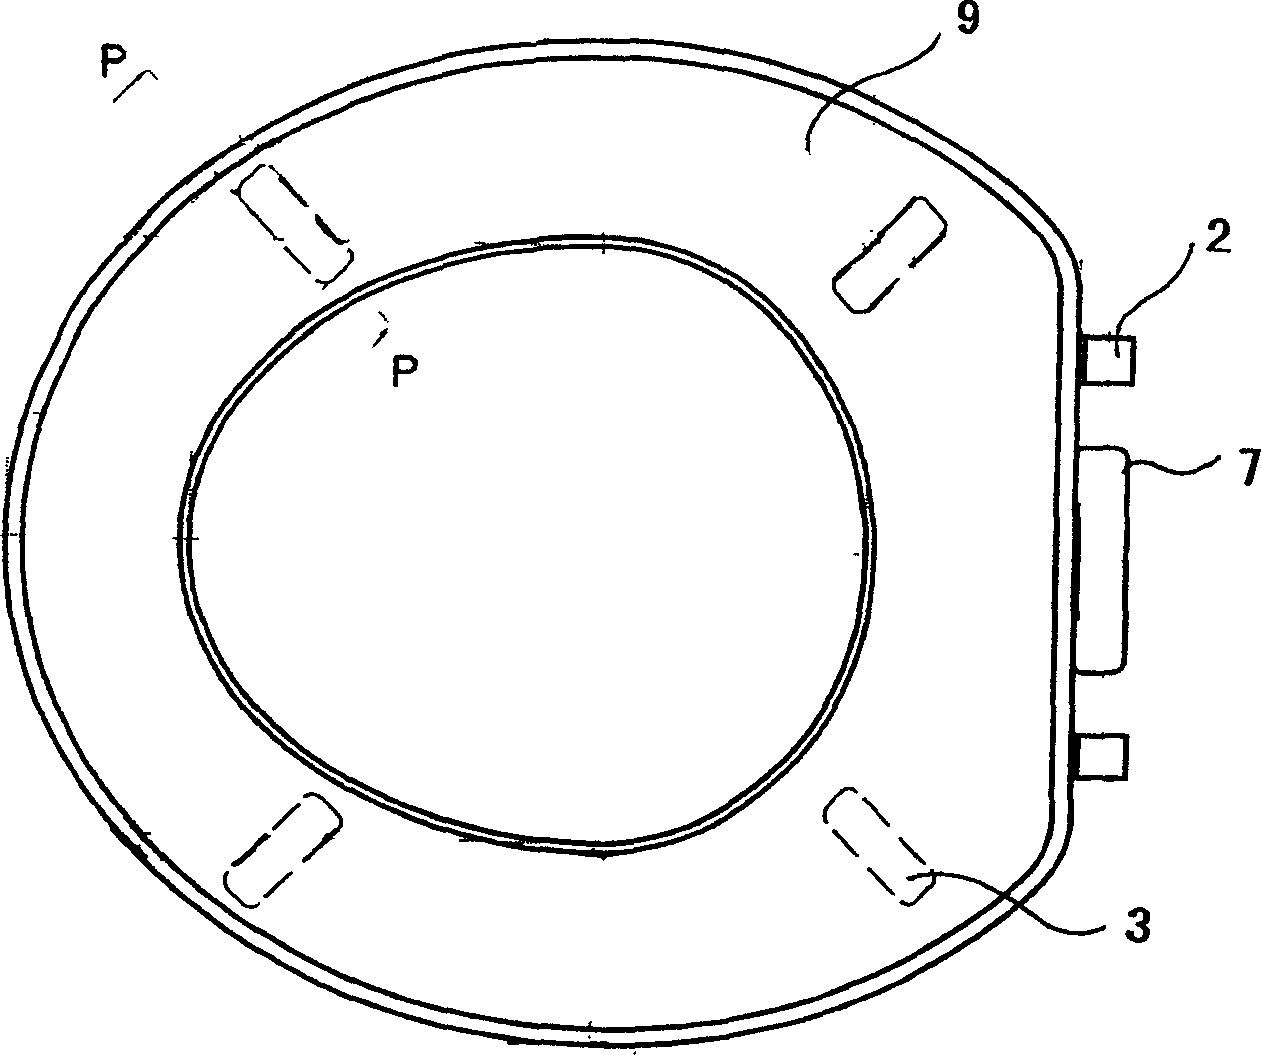 Toilet seat with gas bag structure